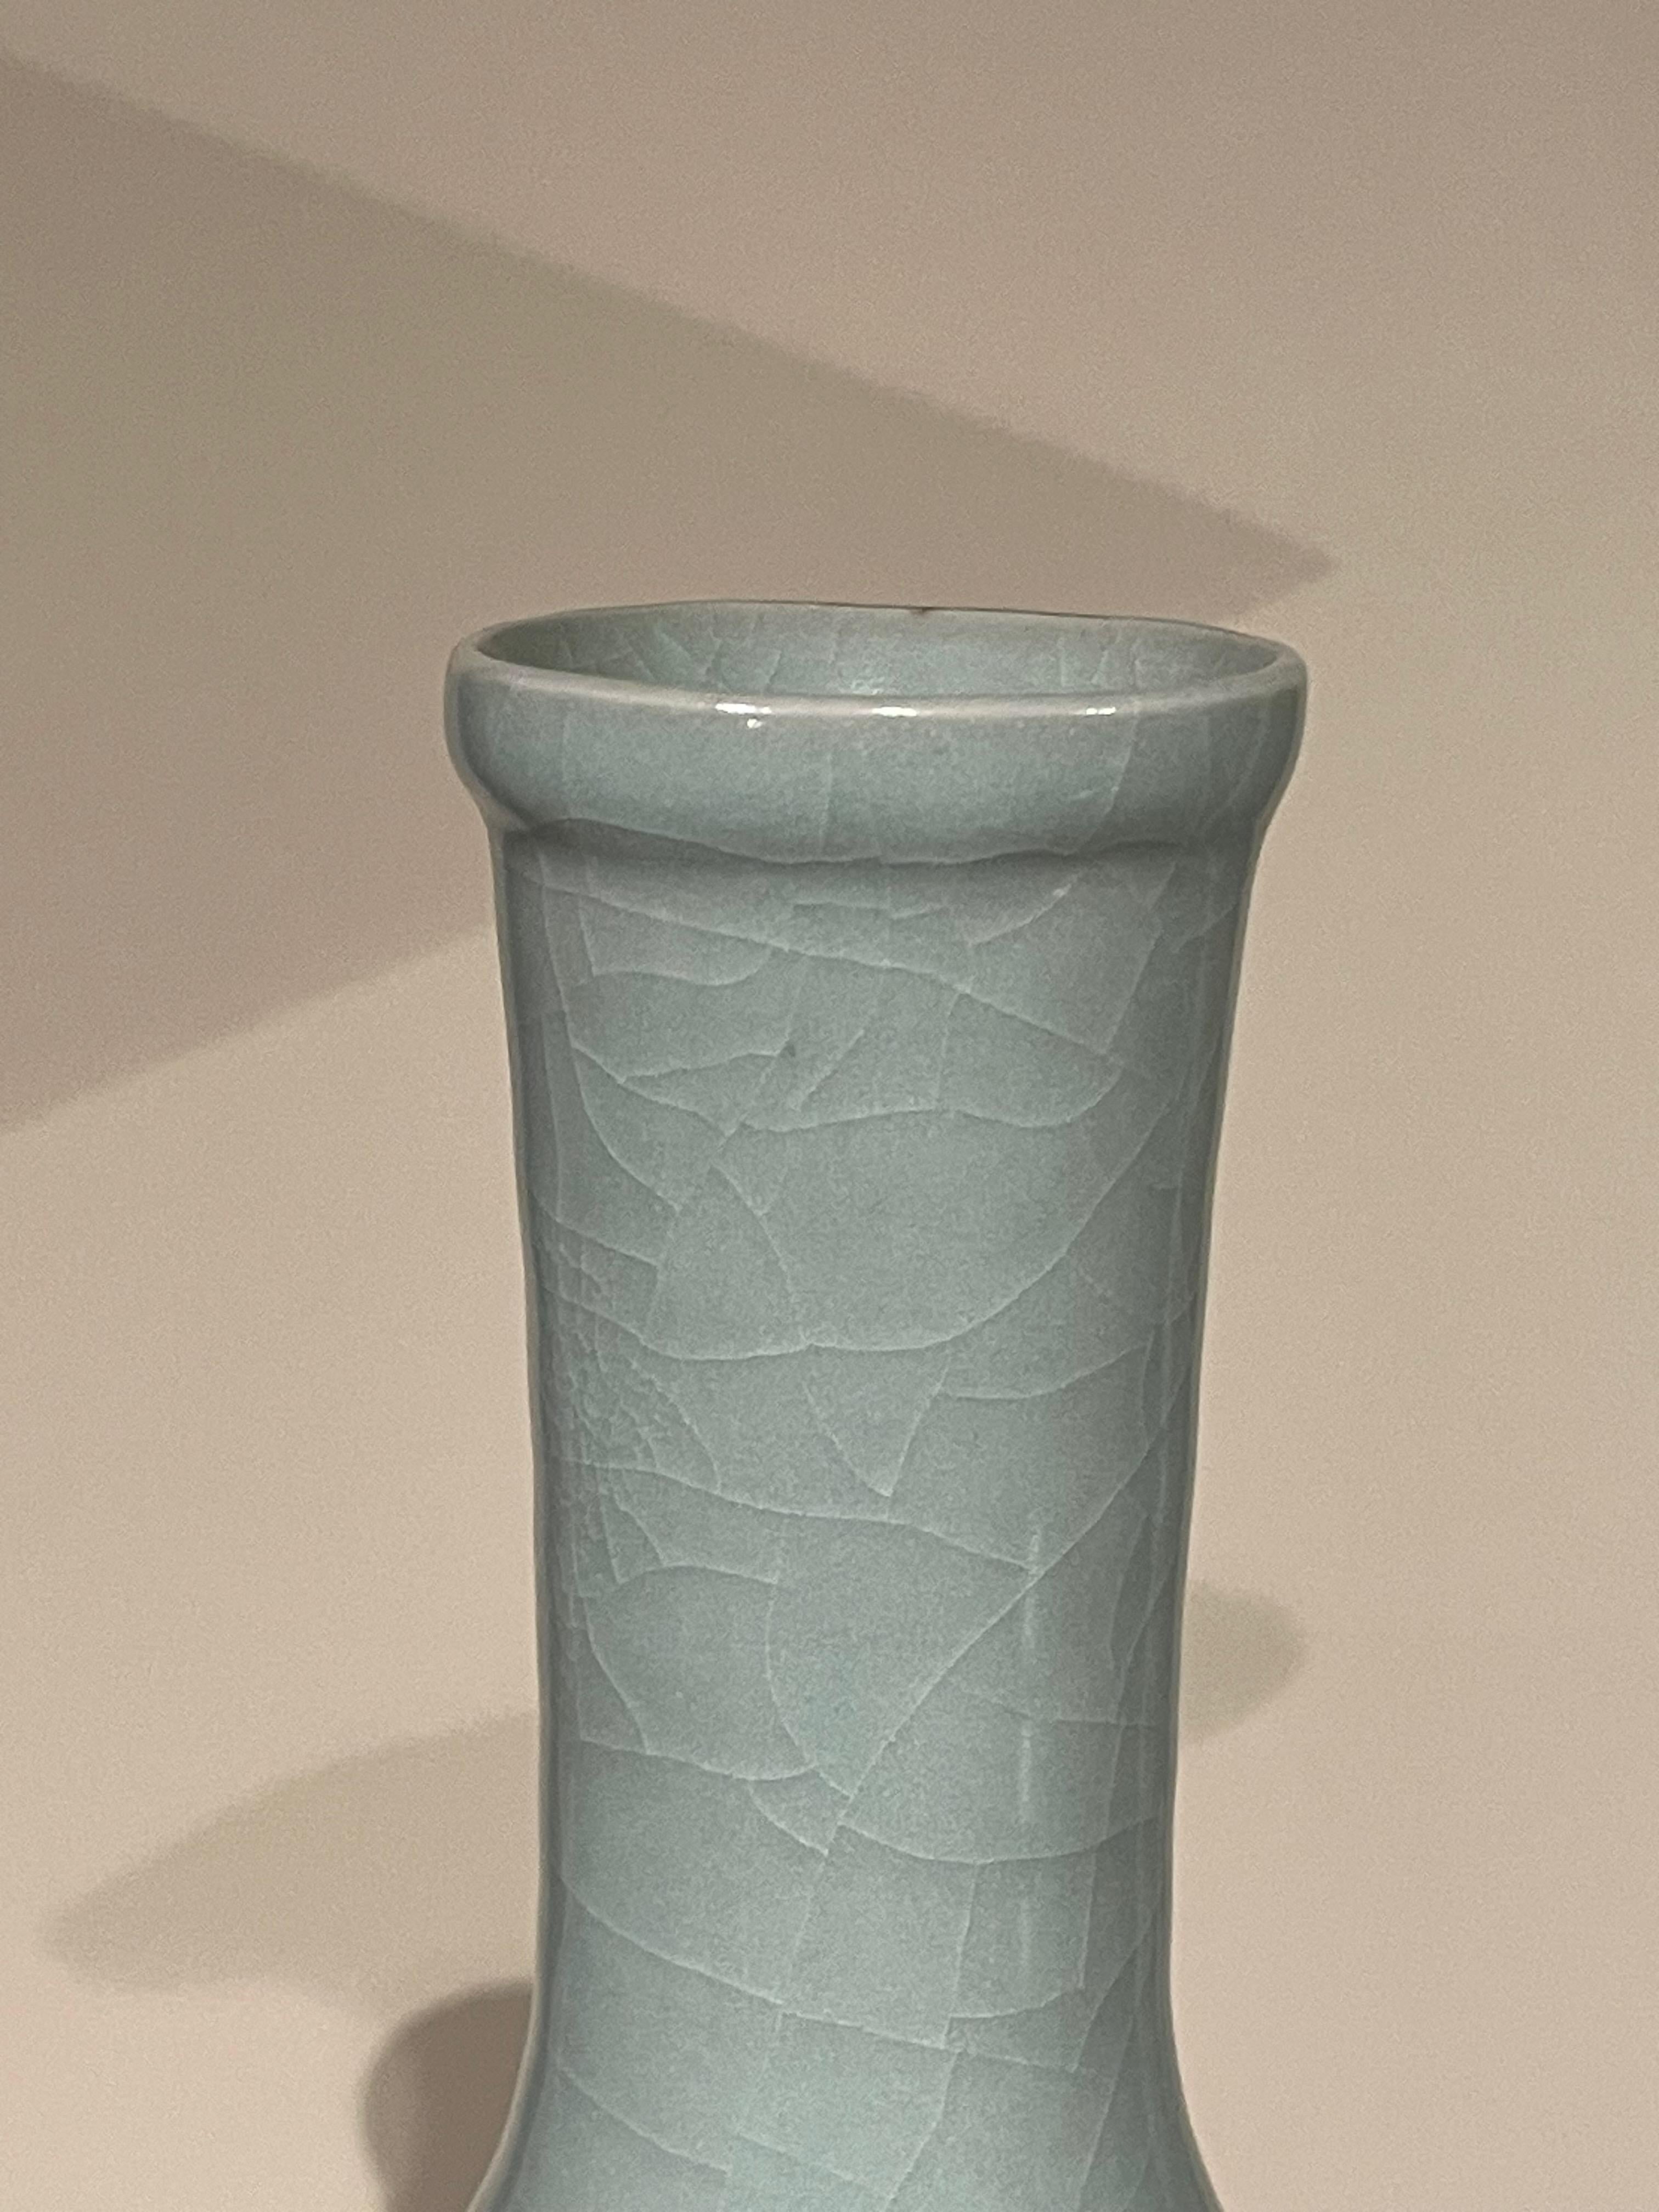 Contemporary Chinese pale turquoise vase.
Funnel neck design.
Large collection available with varying sizes and shapes.
ARRIVING APRIL